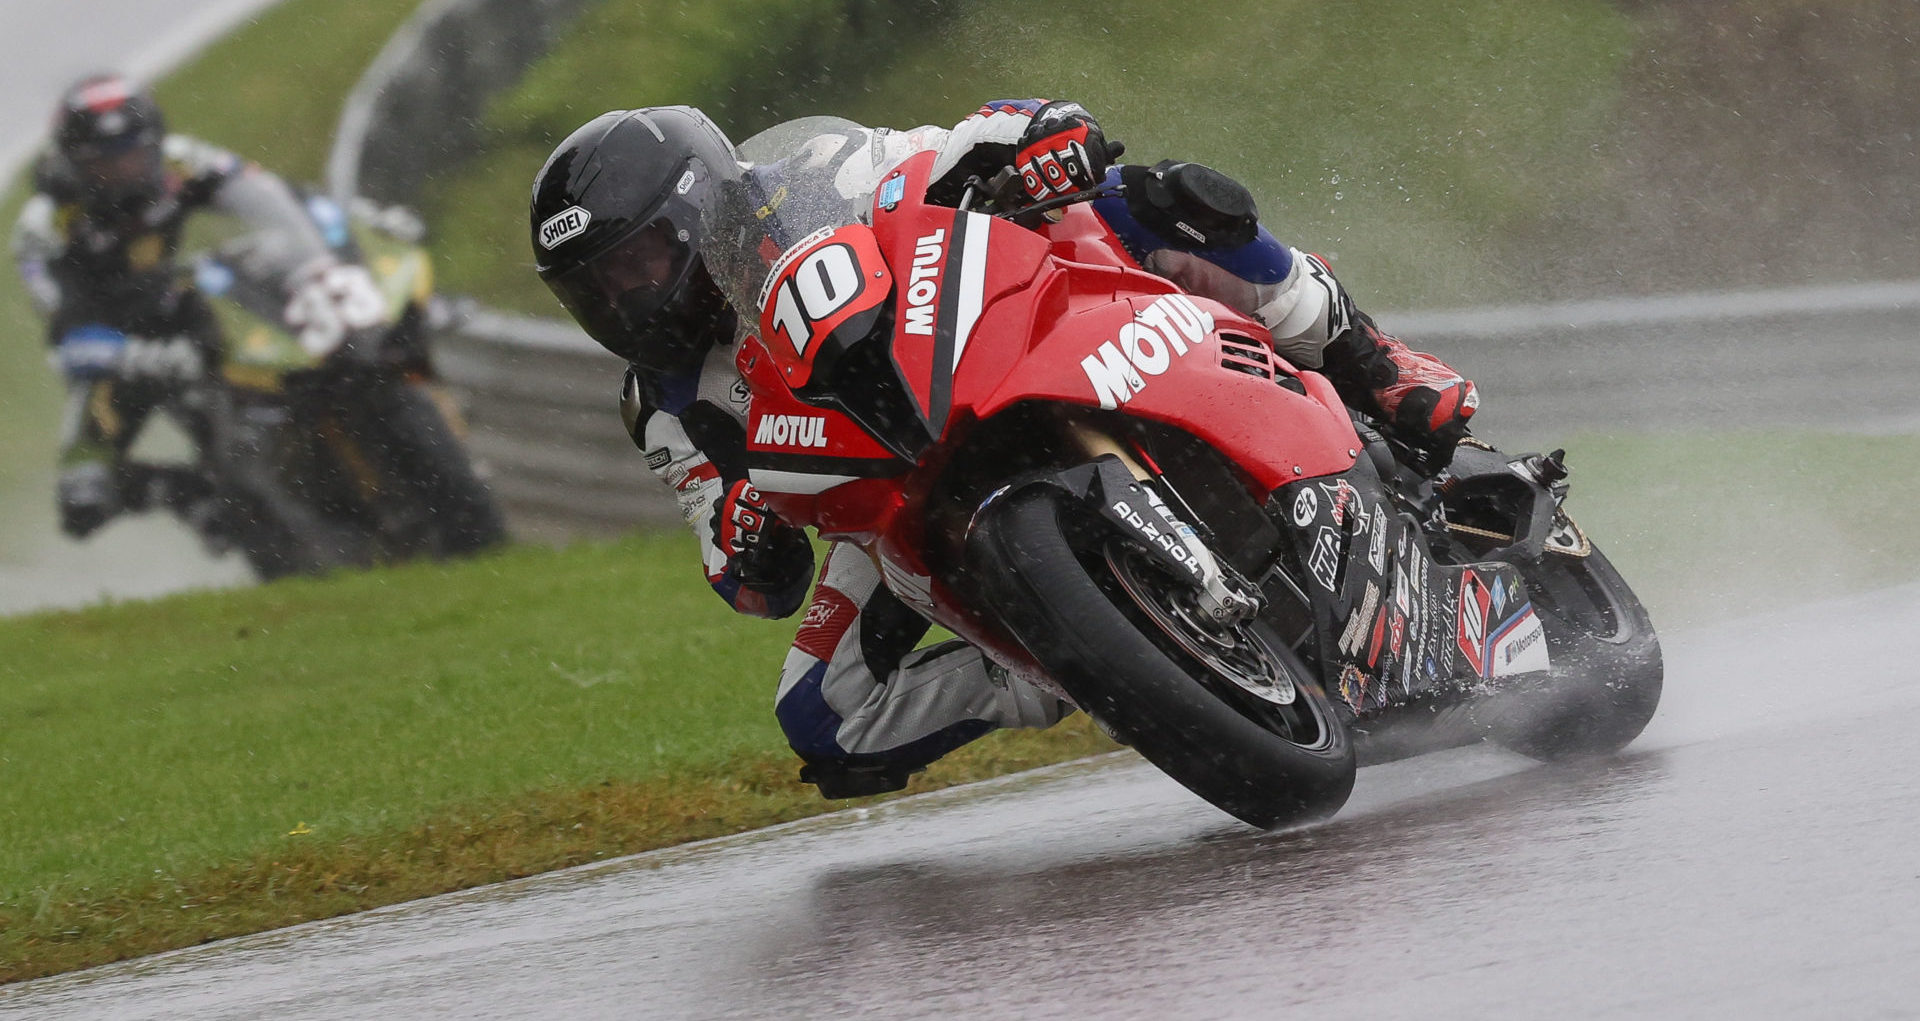 Travis Wyman (10) during one of the wet MotoAmerica Superbike races at Barber Motorsports Park. Photo by Brian J Nelson, courtesy Travis Wyman Racing.